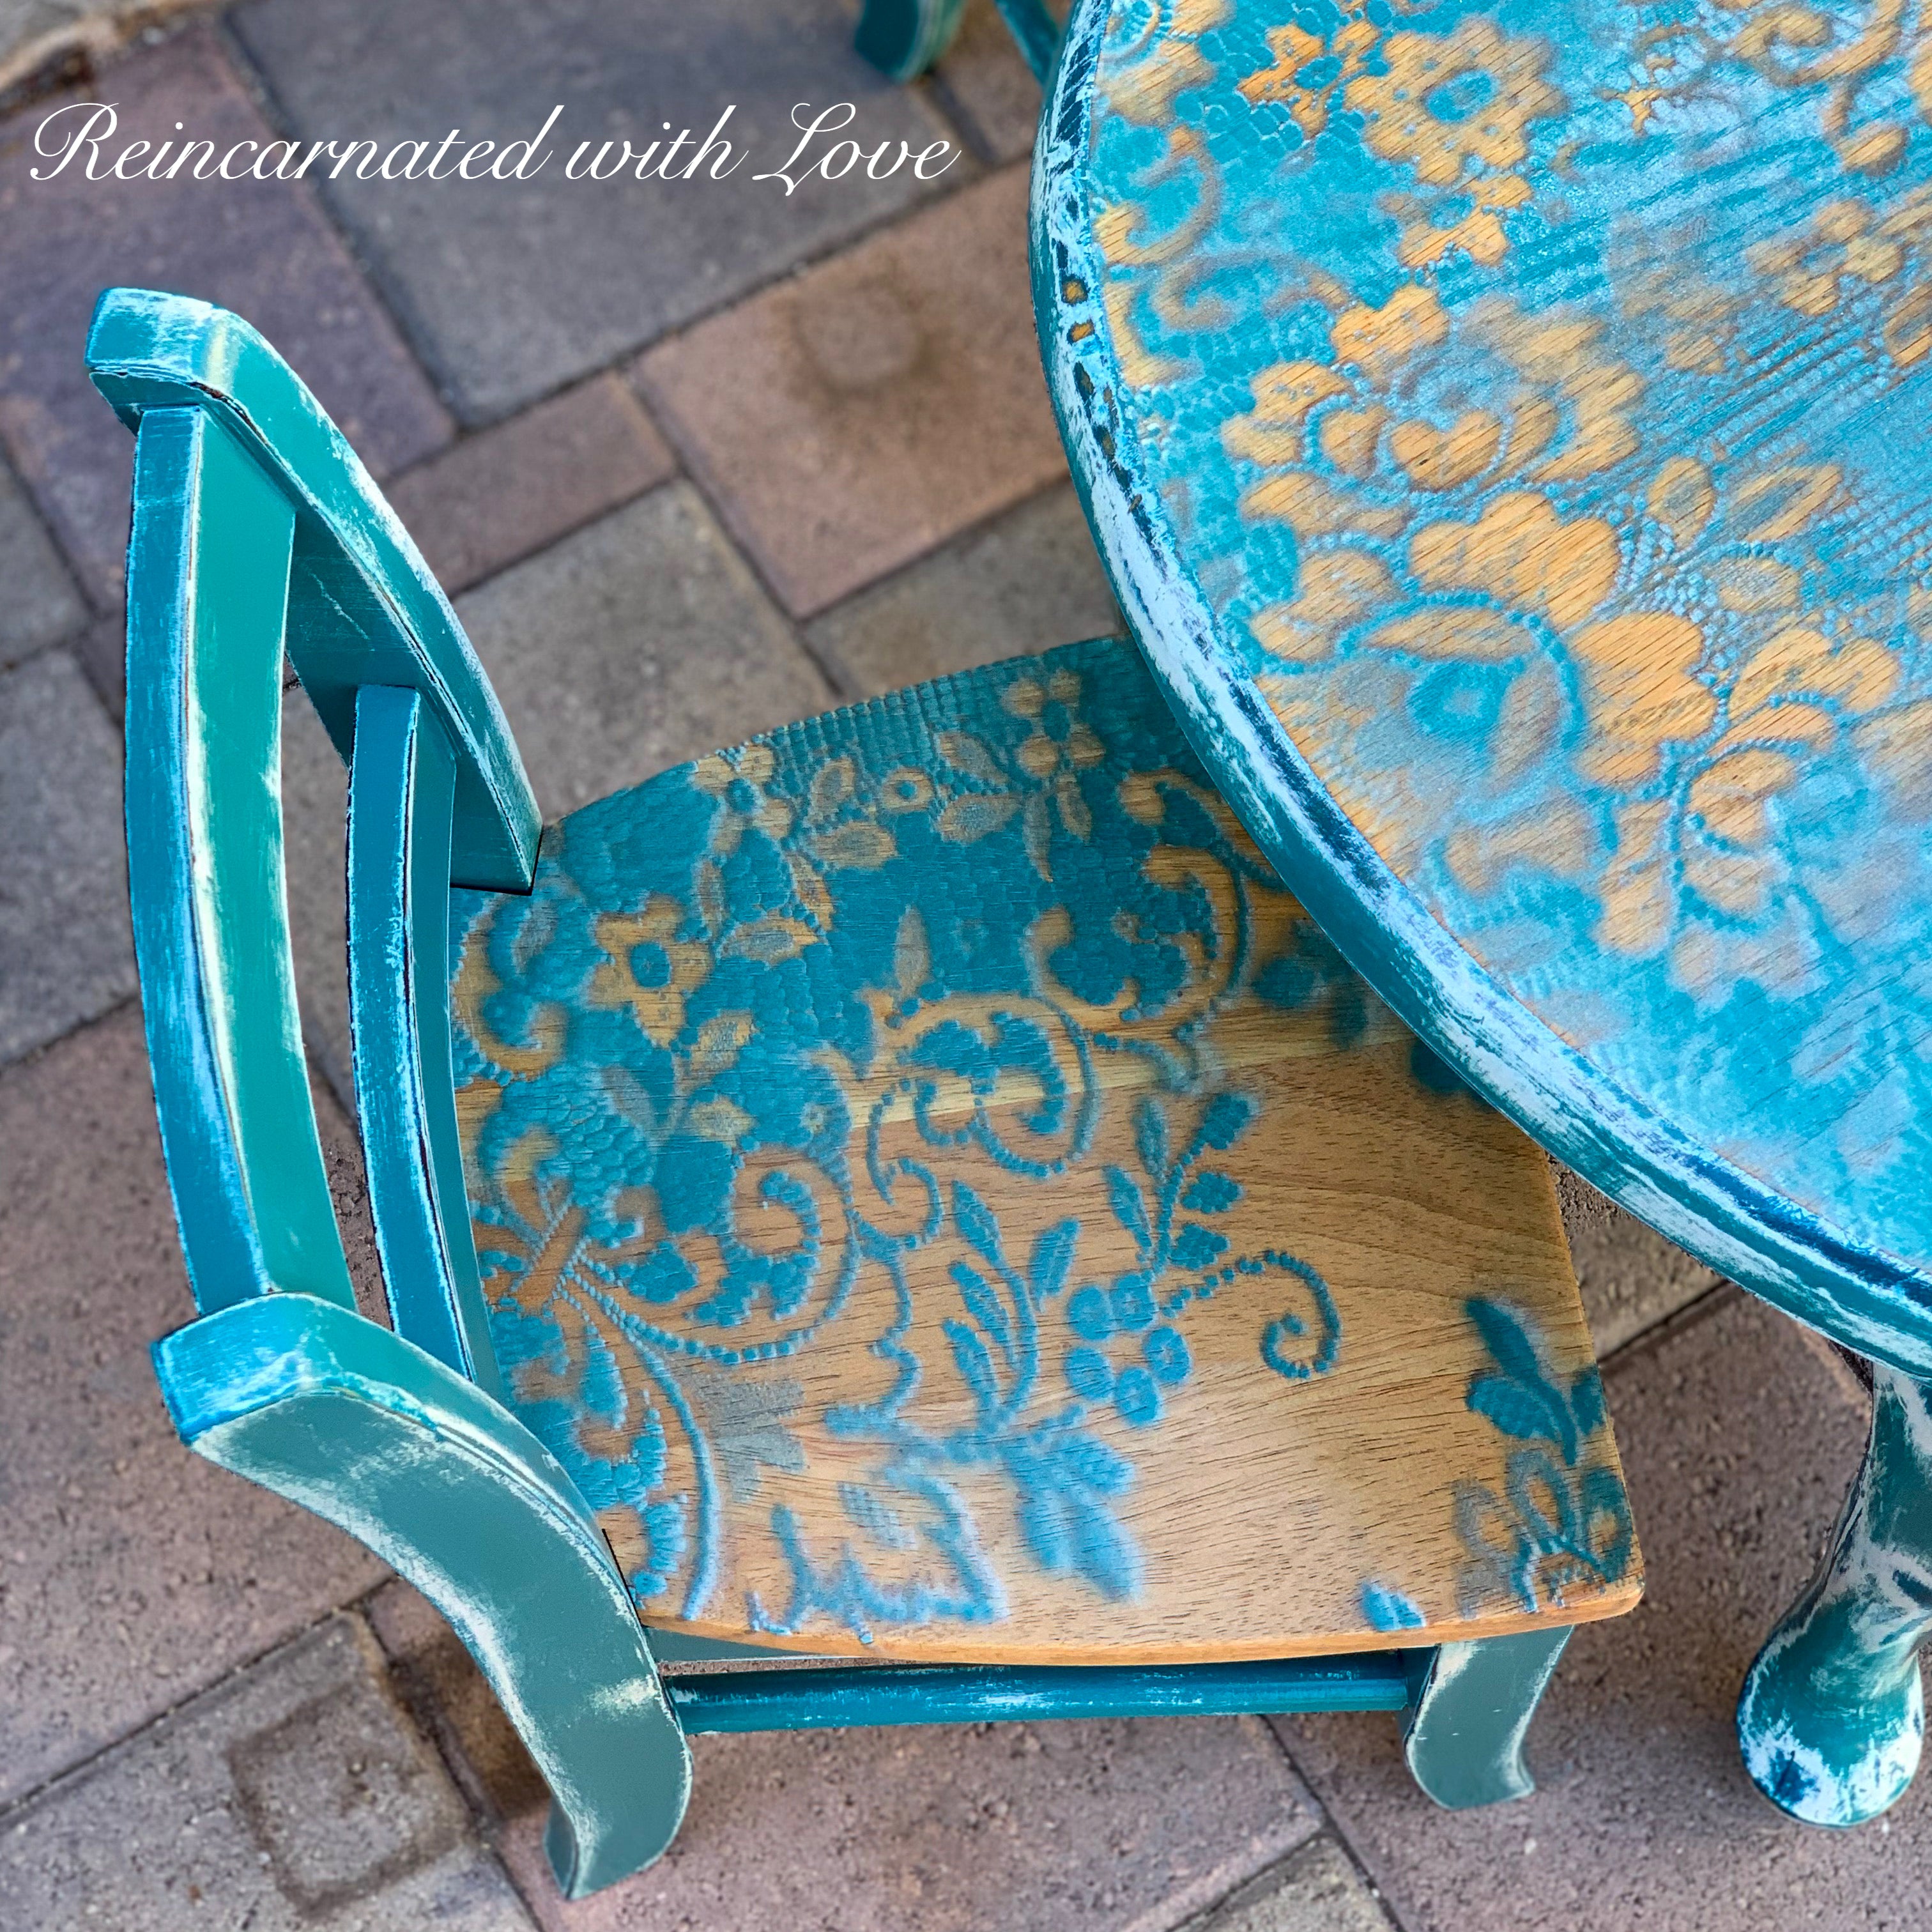 Shabby chic style kid’s table & chair, painted with distressed blue lace accents over stained wood.